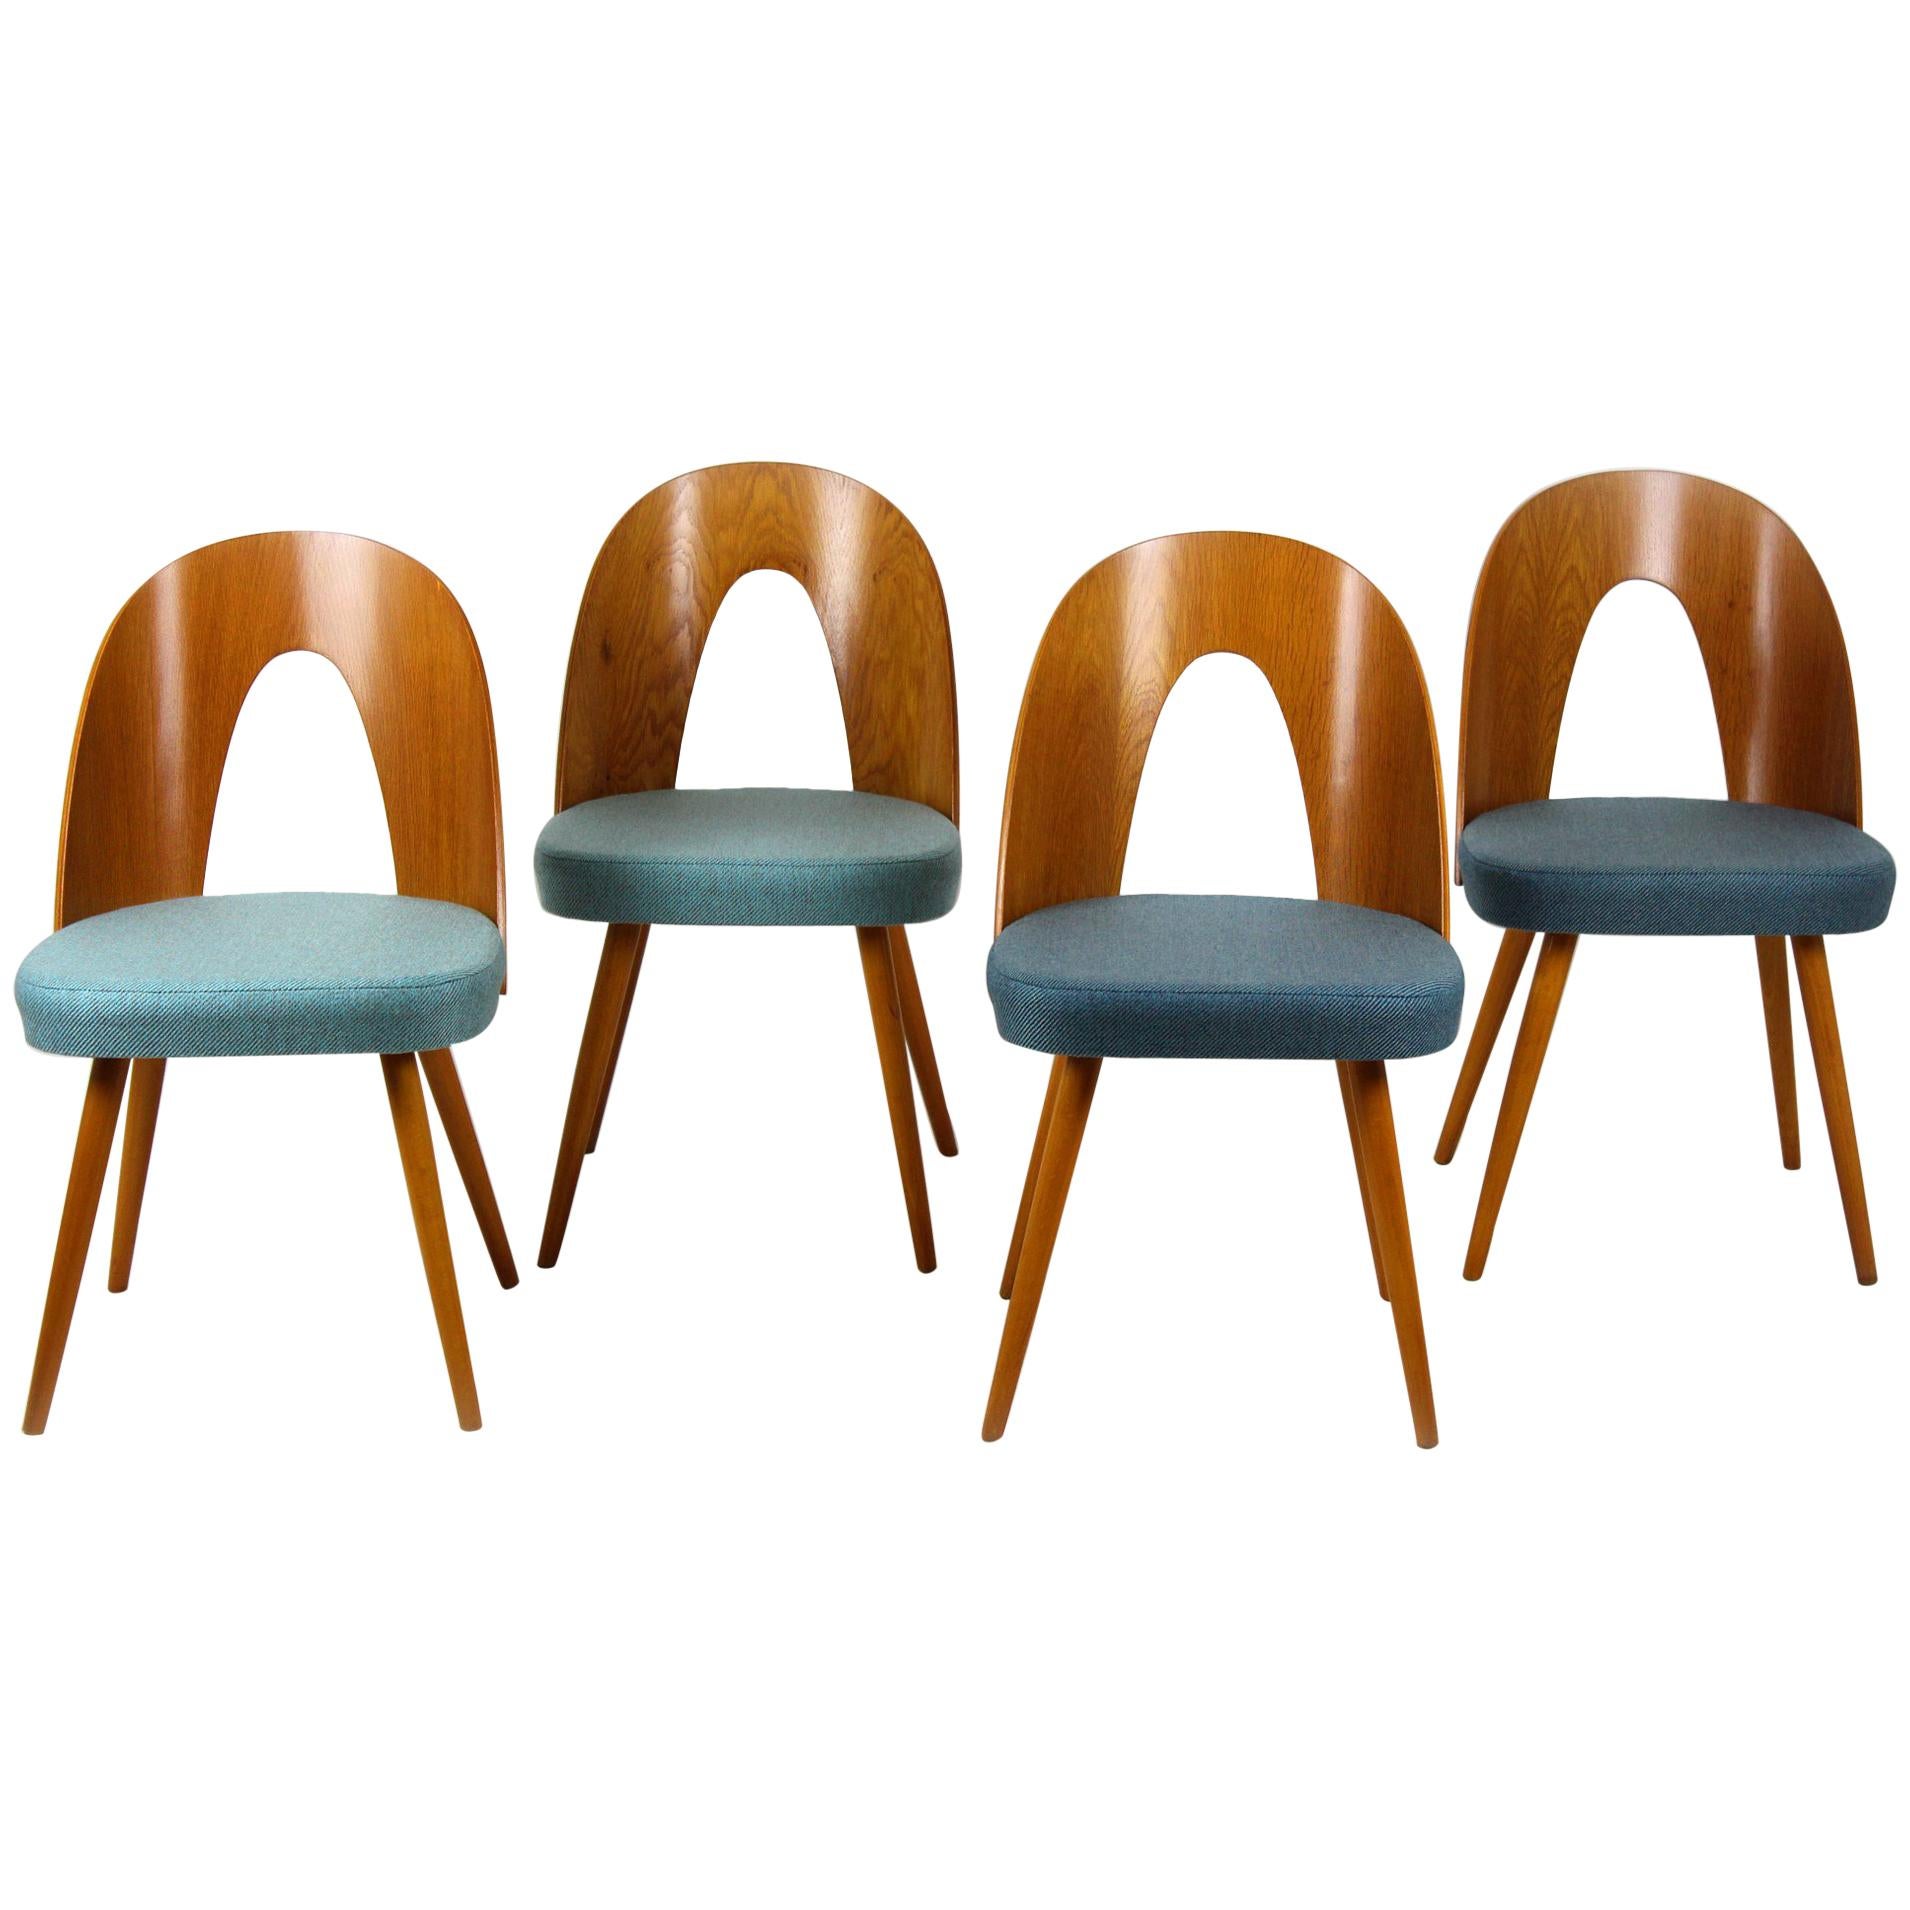 Dining Chairs by Antonin Suman for Tatra, 1960s, Set of Four